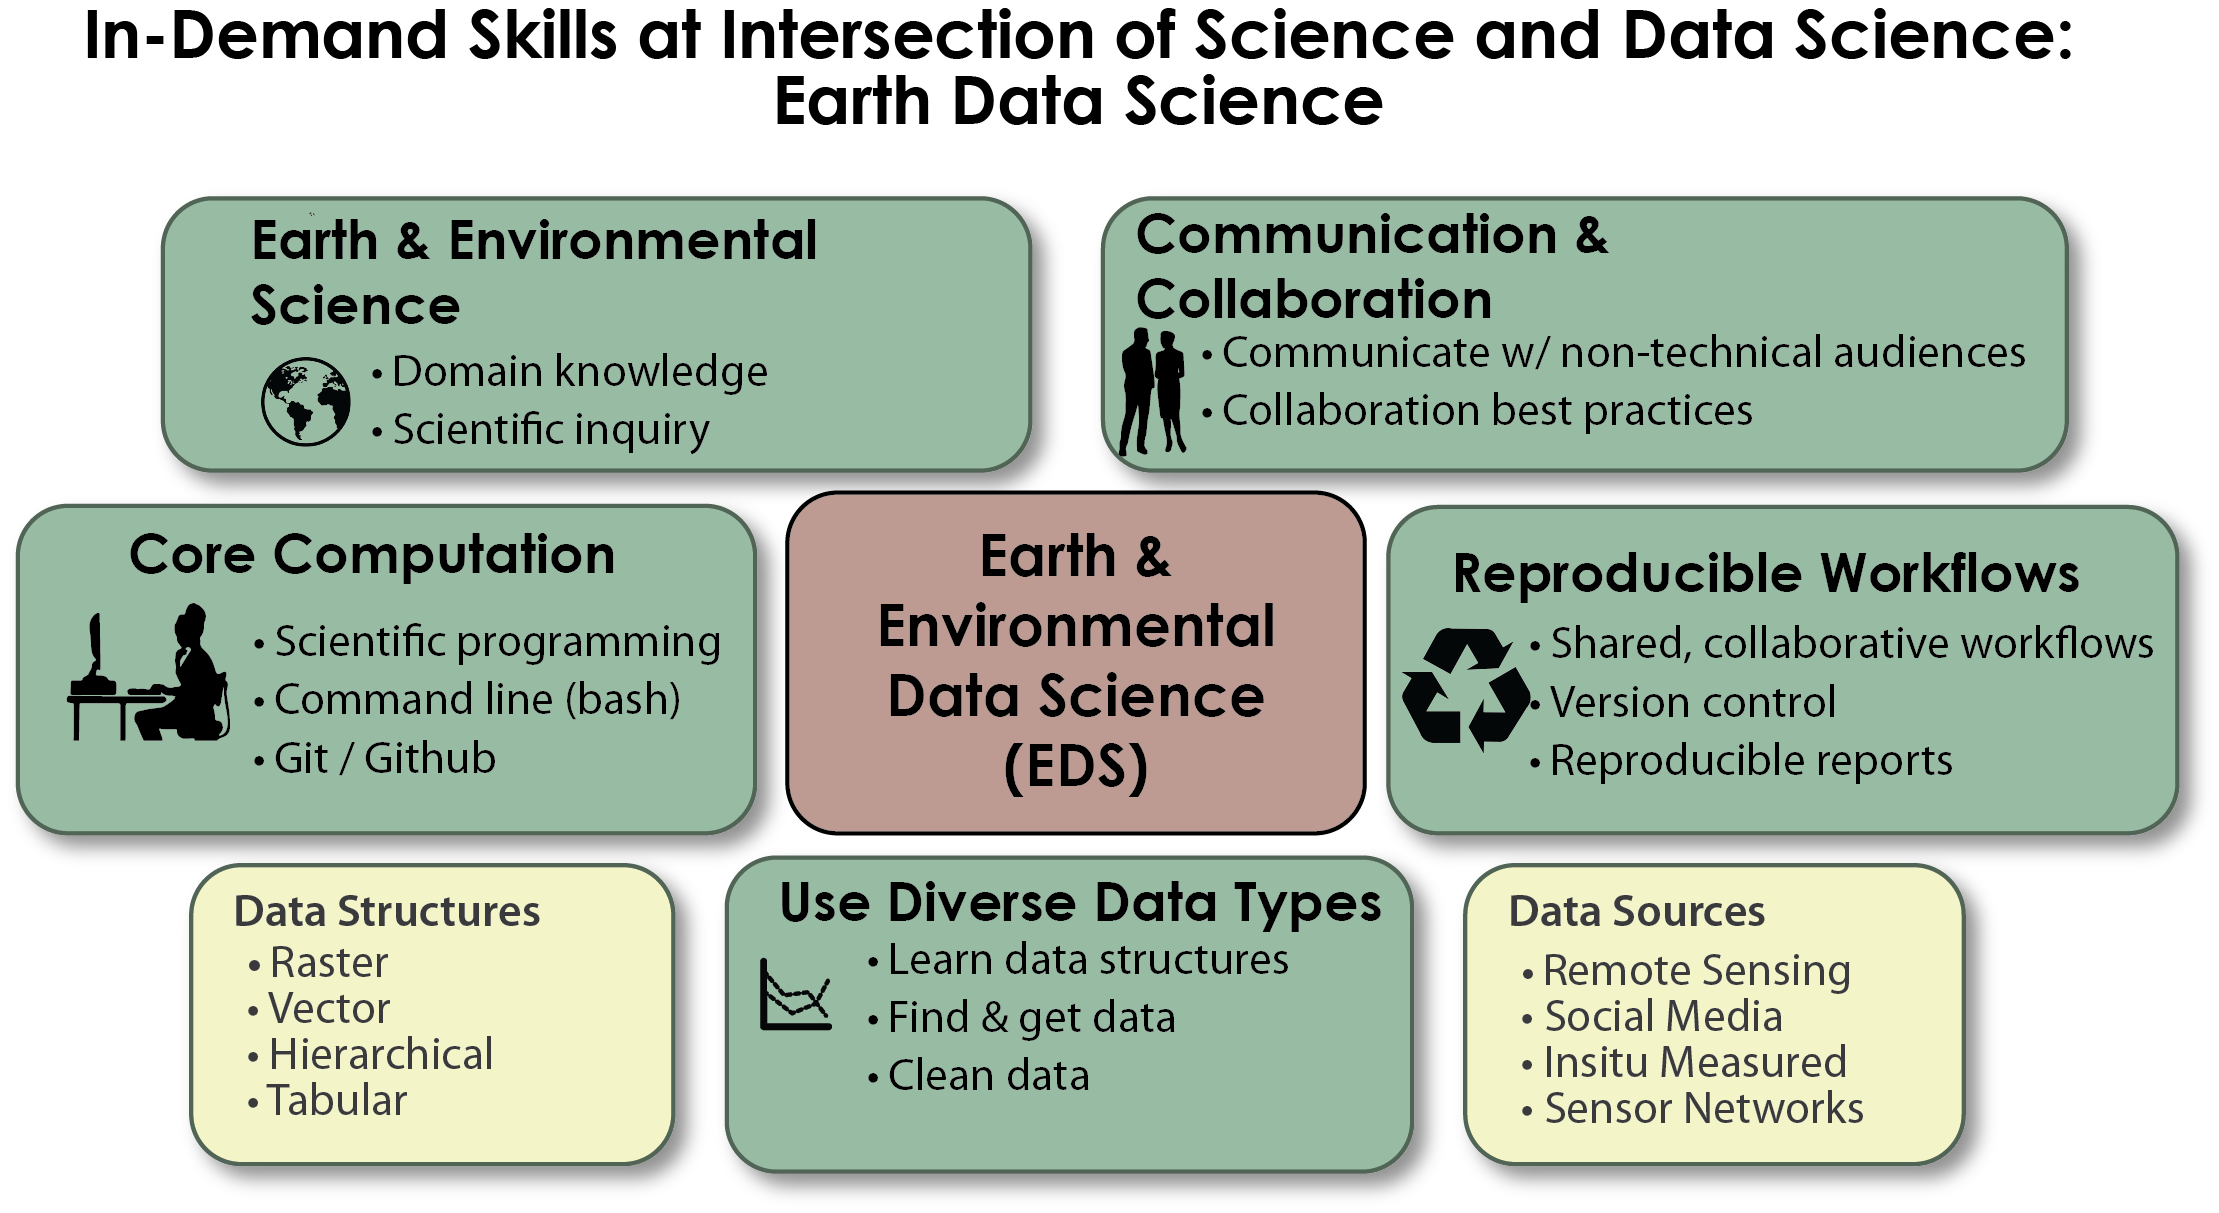 Image that i made showing the skills associated with earth and environmental data science.